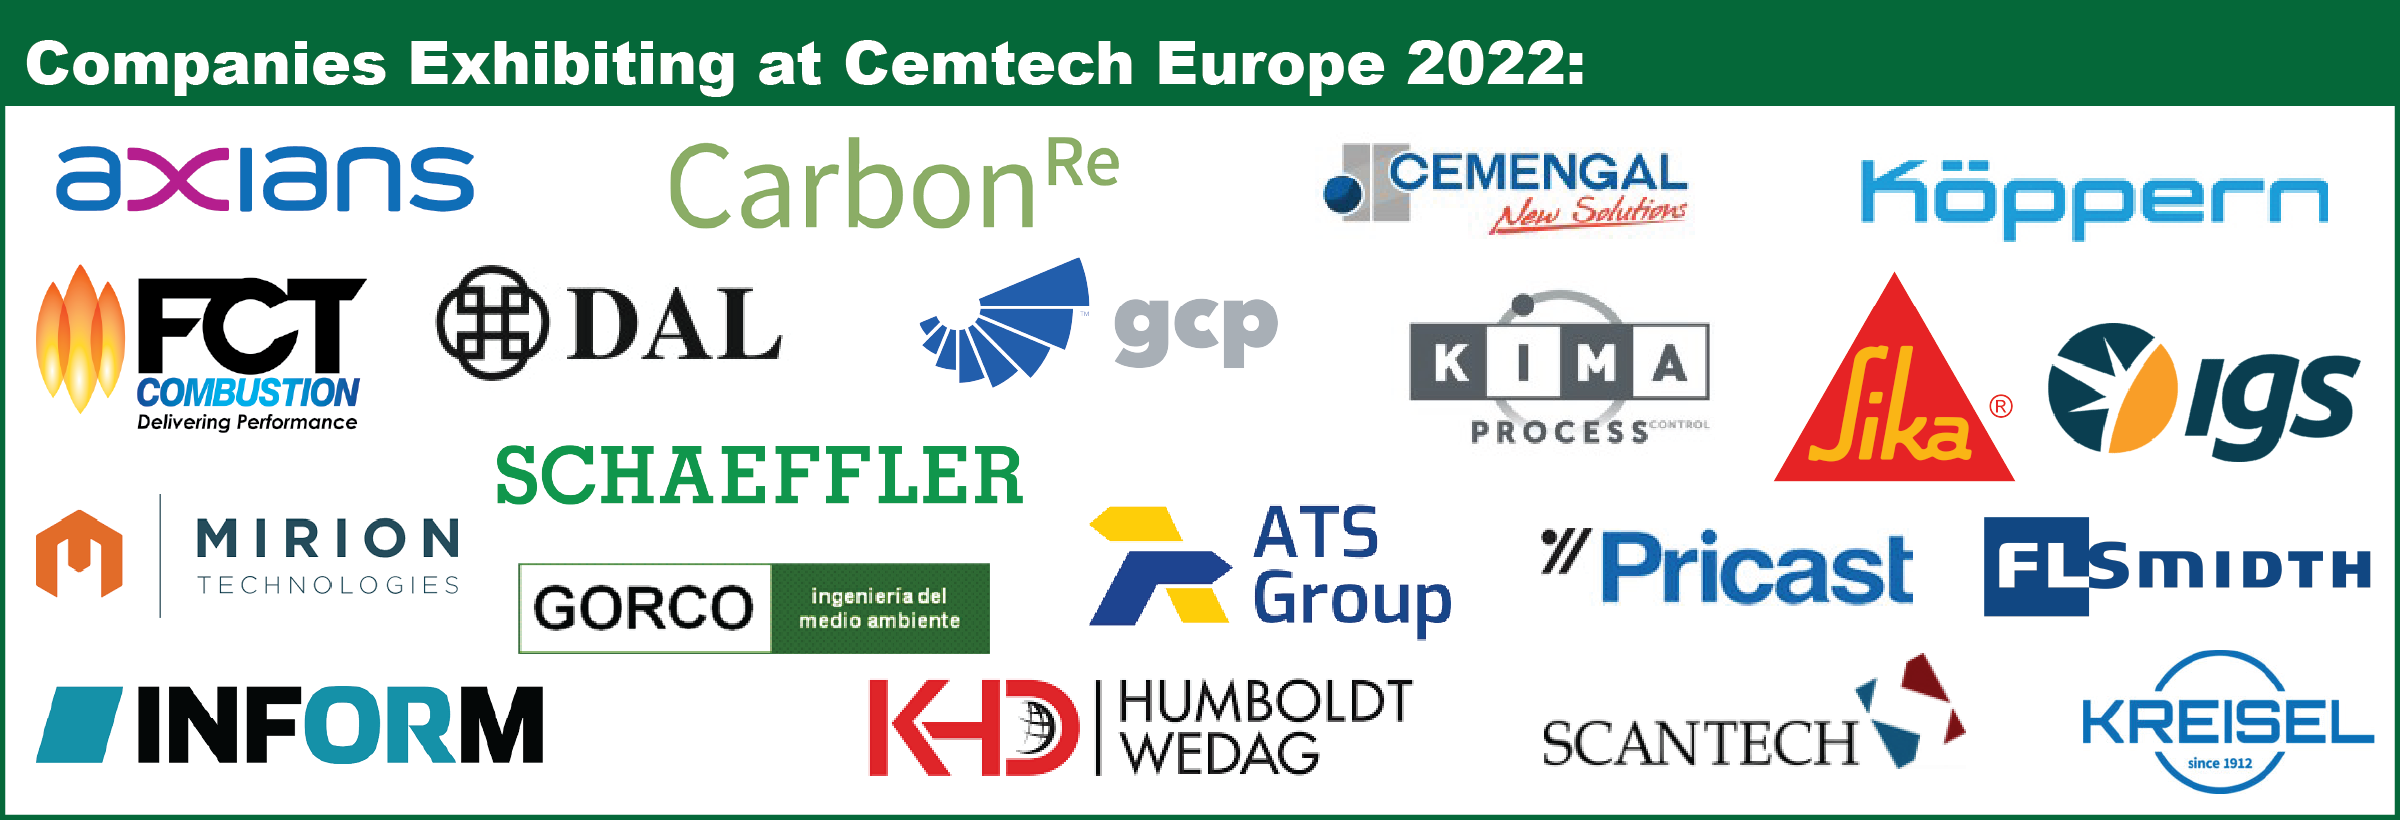 Cemtech Europe 2022 Exhibitors and Sponsors